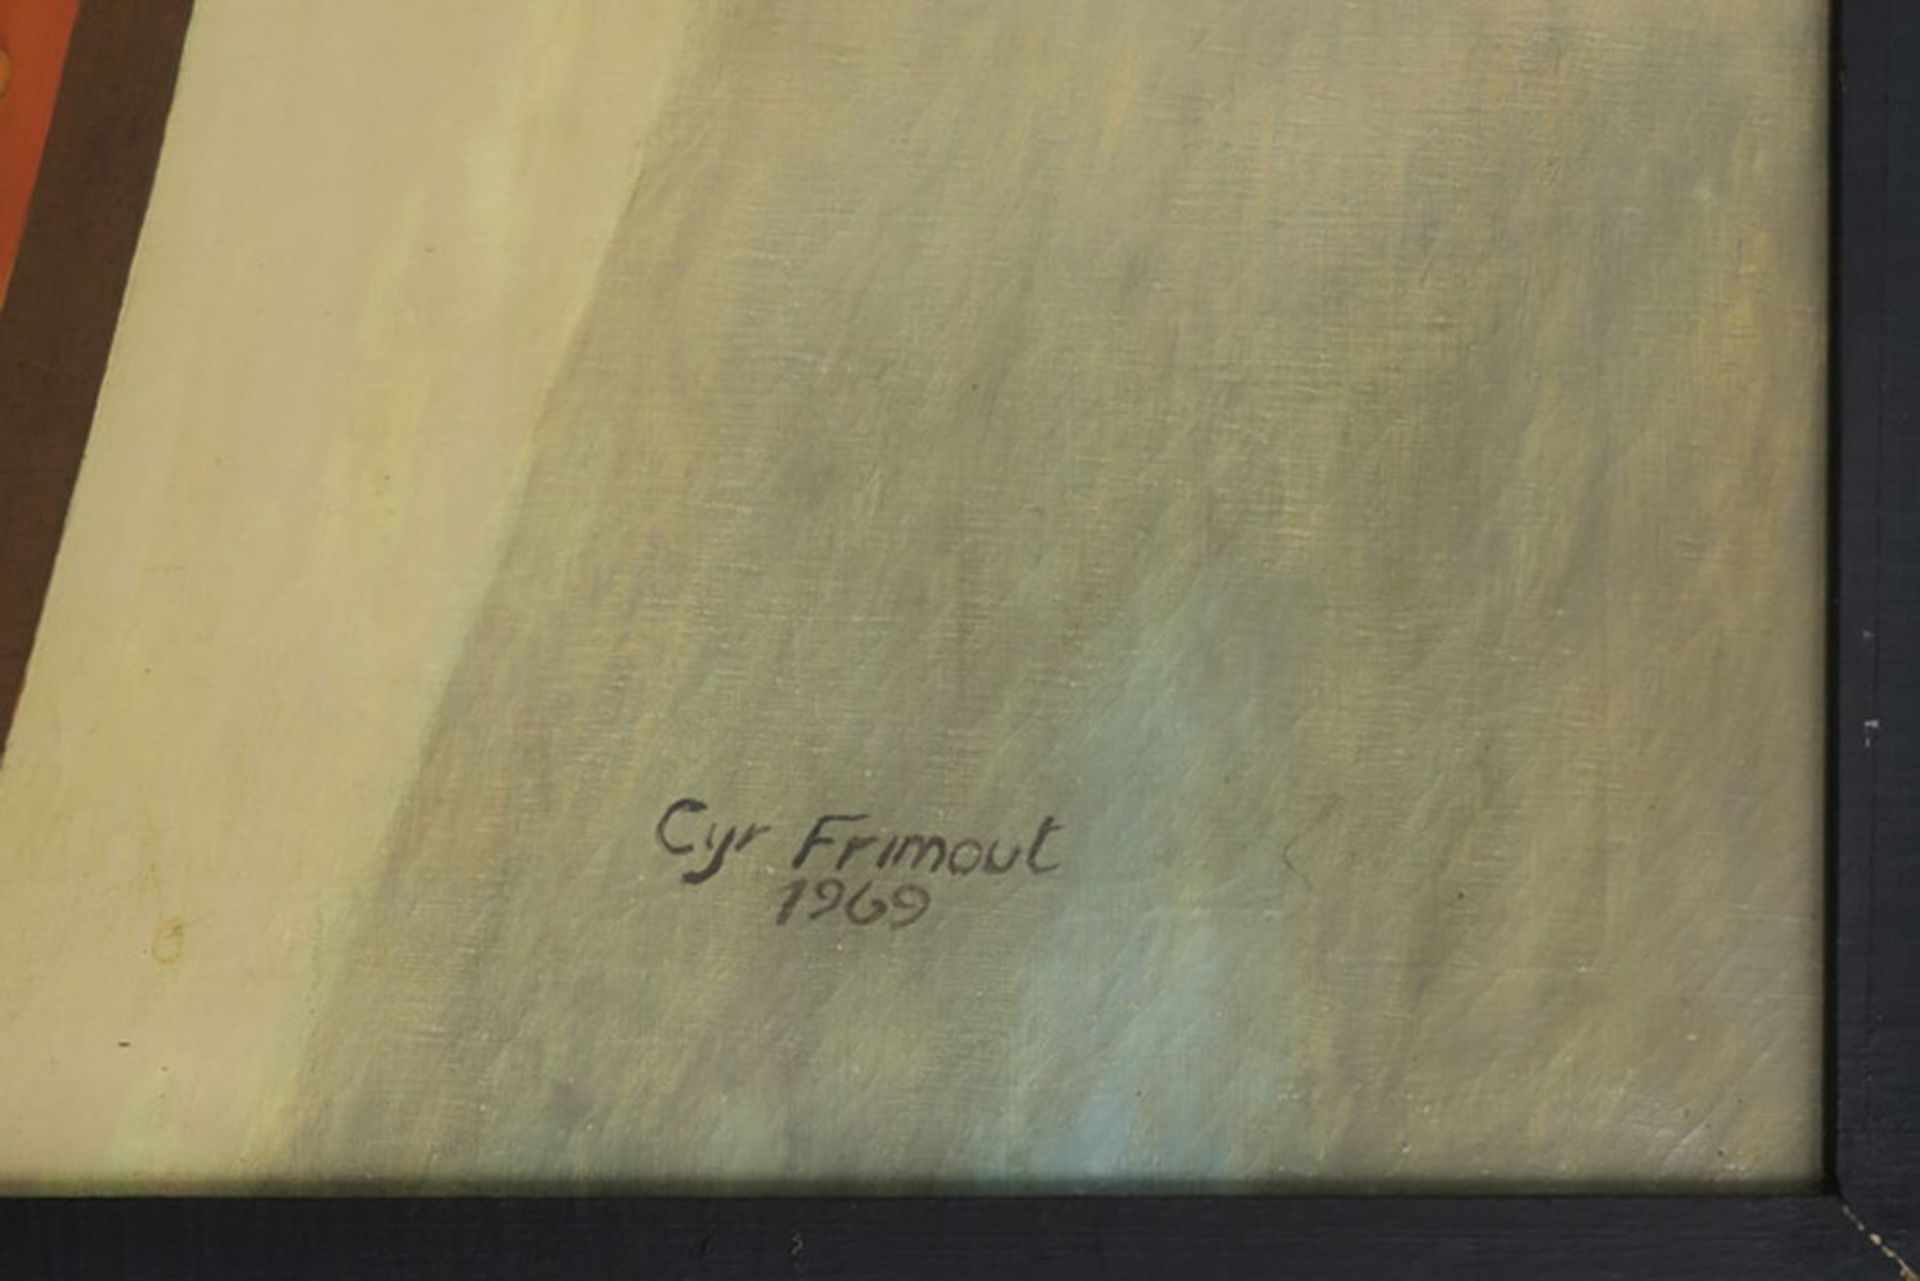 20th Cent. Belgian oil on canvas - titled and signed Cyr Frimout - - FRIMOUT CYR, [...] - Image 3 of 4